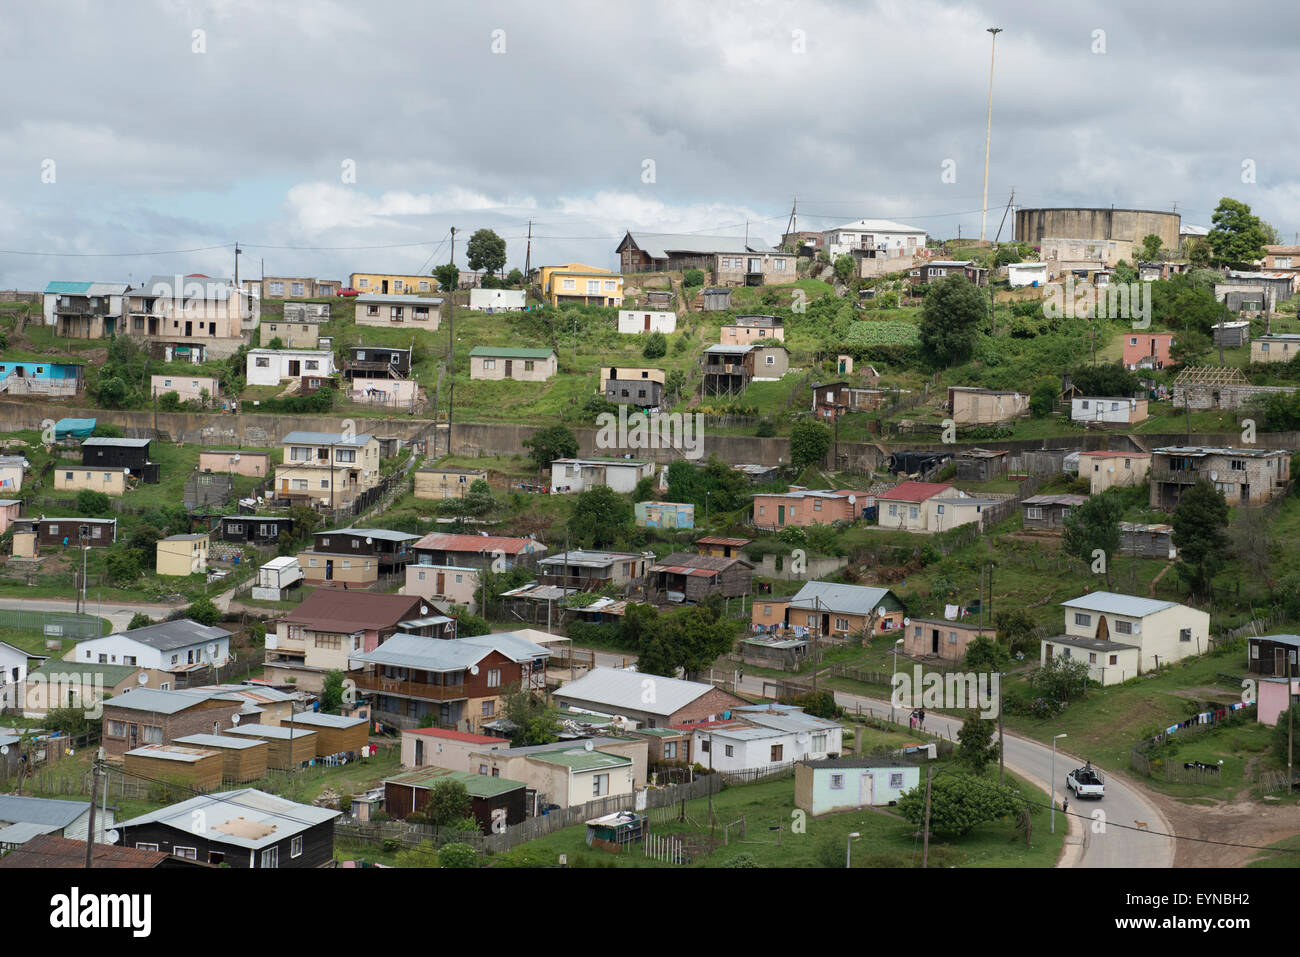 Township in the Knysna area, Western Cape, Western Cape, South Africa Stock Photo